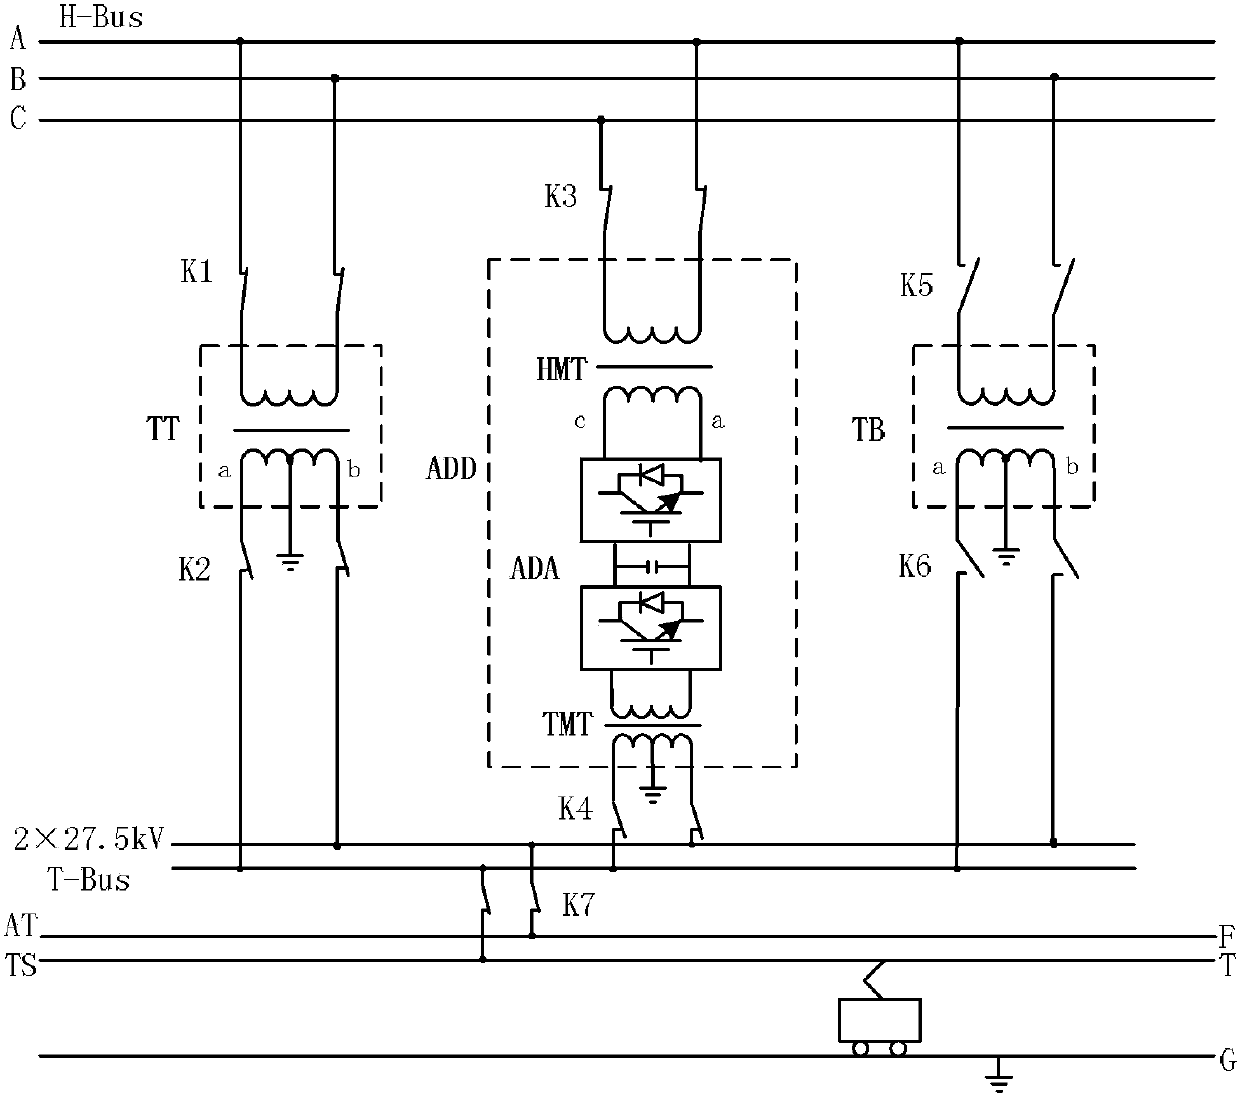 V-v wiring same-phase power supply and transformation structure